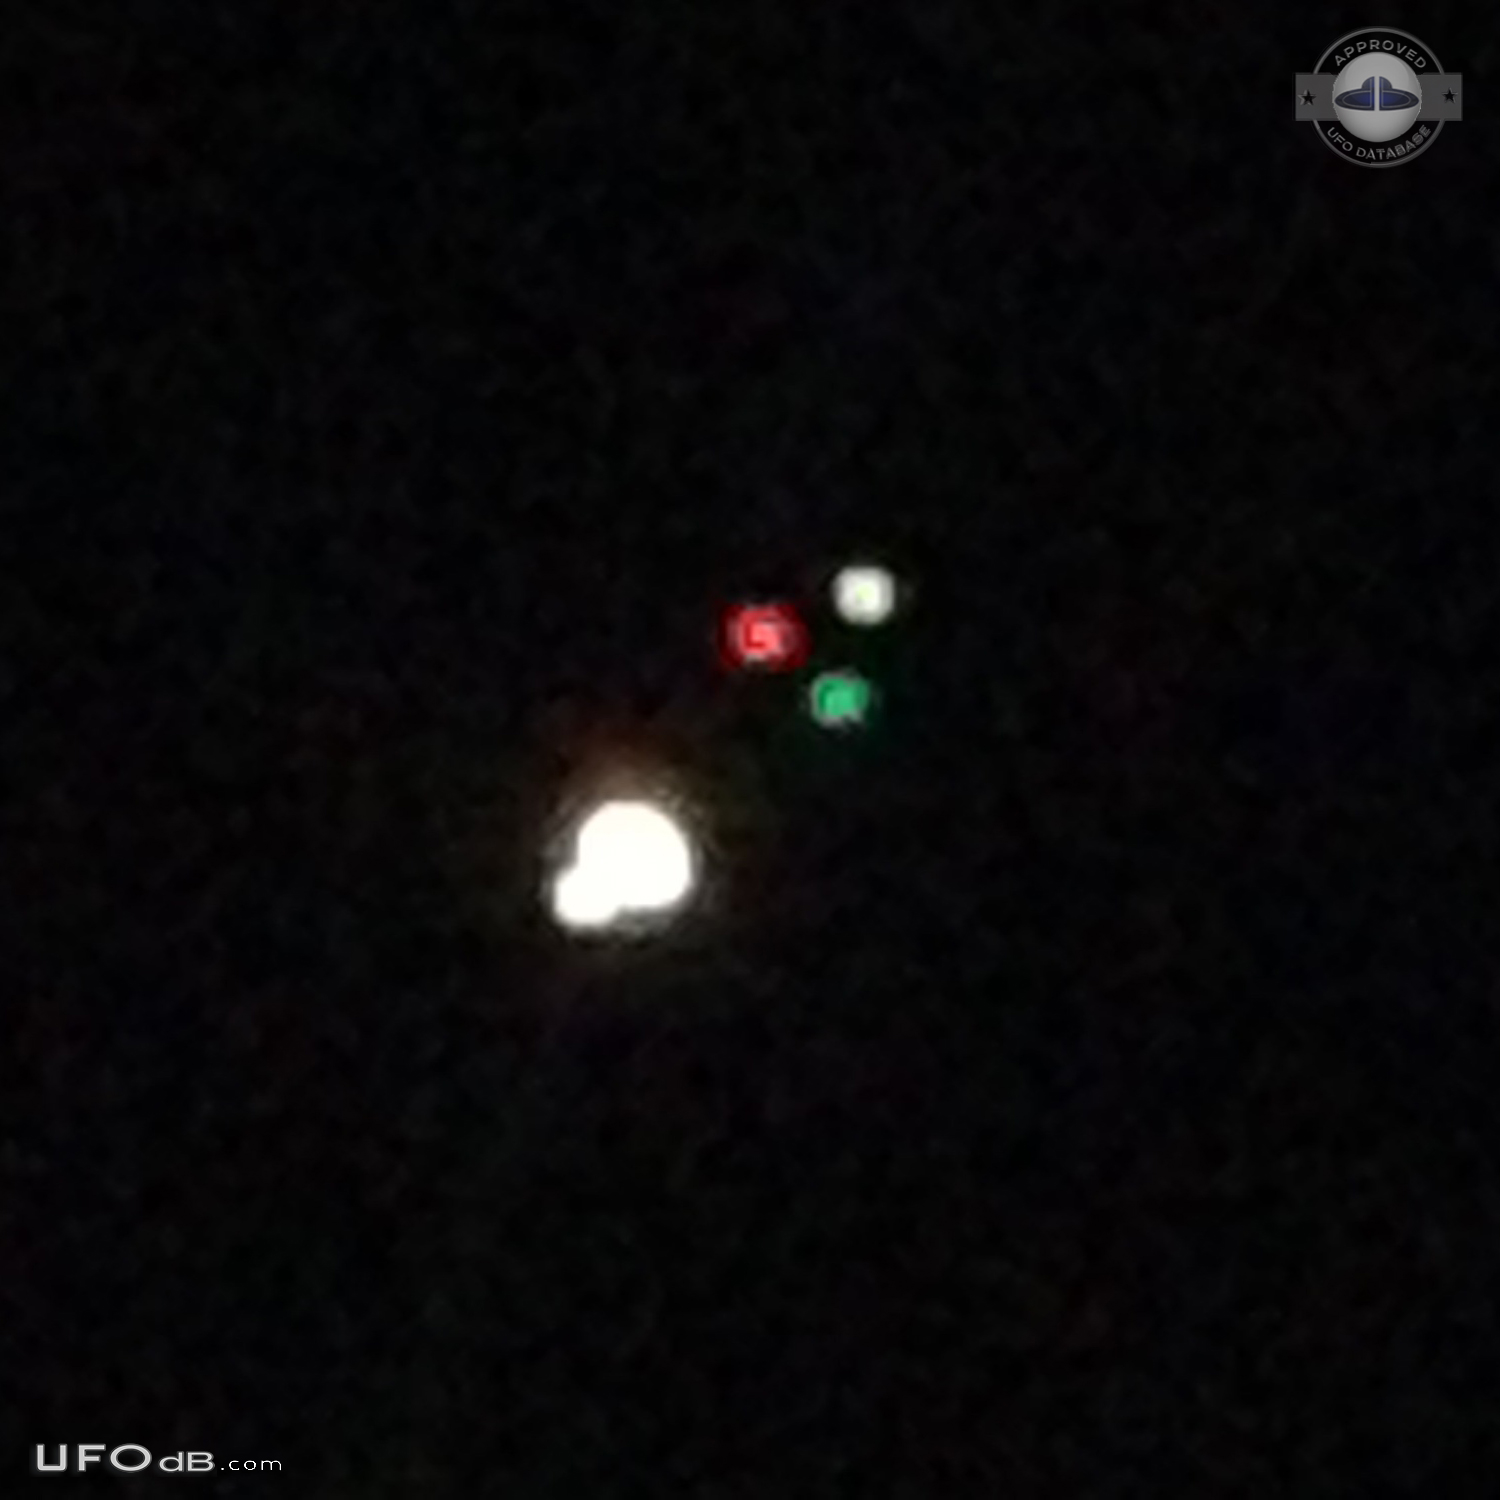 helicopter tractor beamed ufo and both flew off together - Las Vegas N UFO Picture #754-1